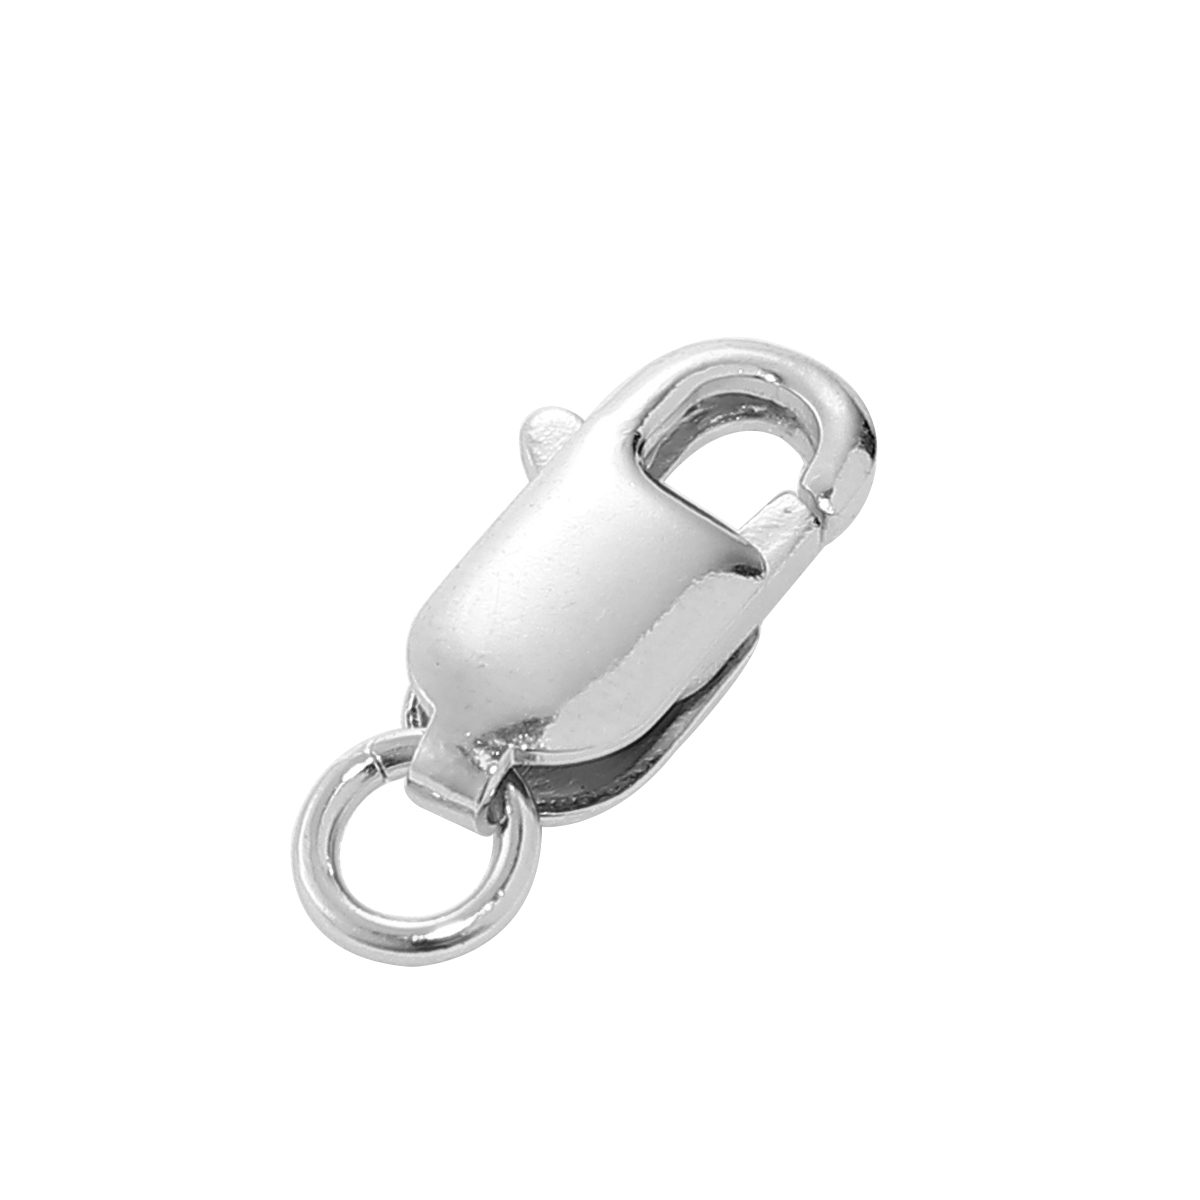 Picture of Sterling Silver Lobster Clasp Findings Silver Tone W/ Closed Soldered Jump Ring 14mm( 4/8") x 5mm( 2/8"), 2 PCs